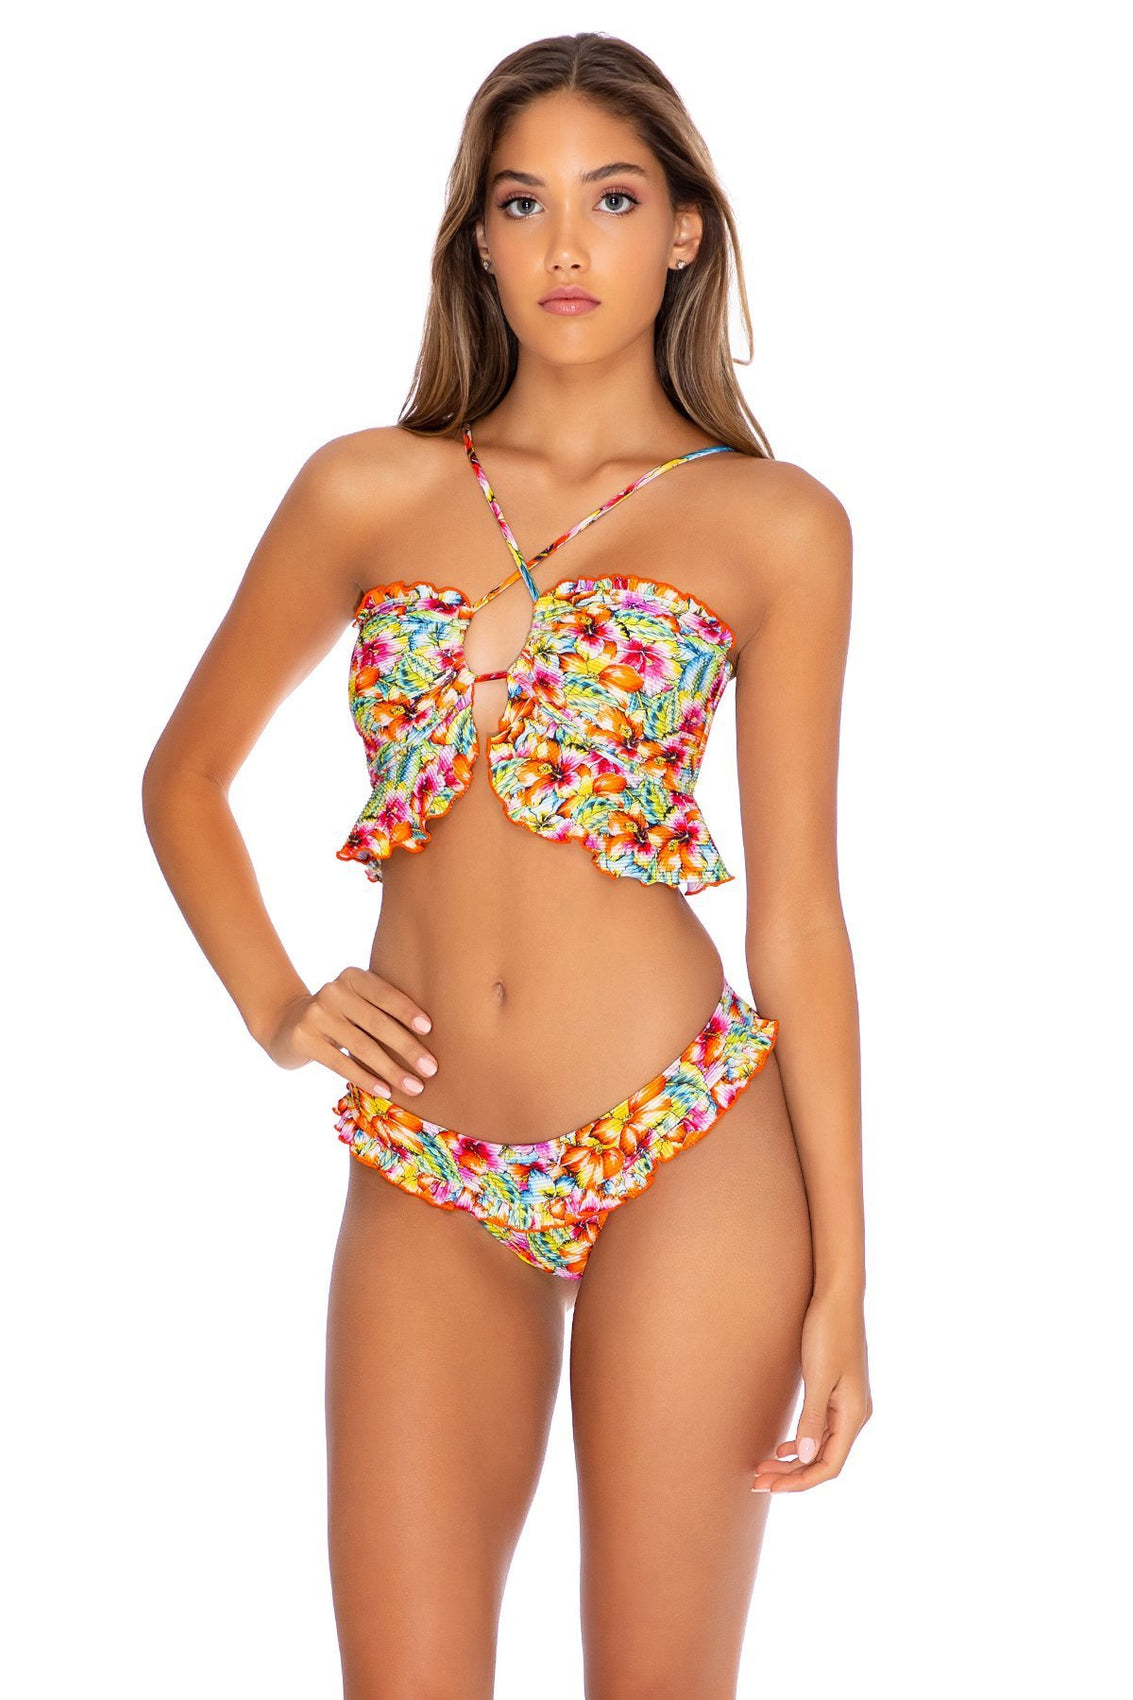 WILD FLOWER - Bandeau Top & Banded Moderate Bottom • Multicolor